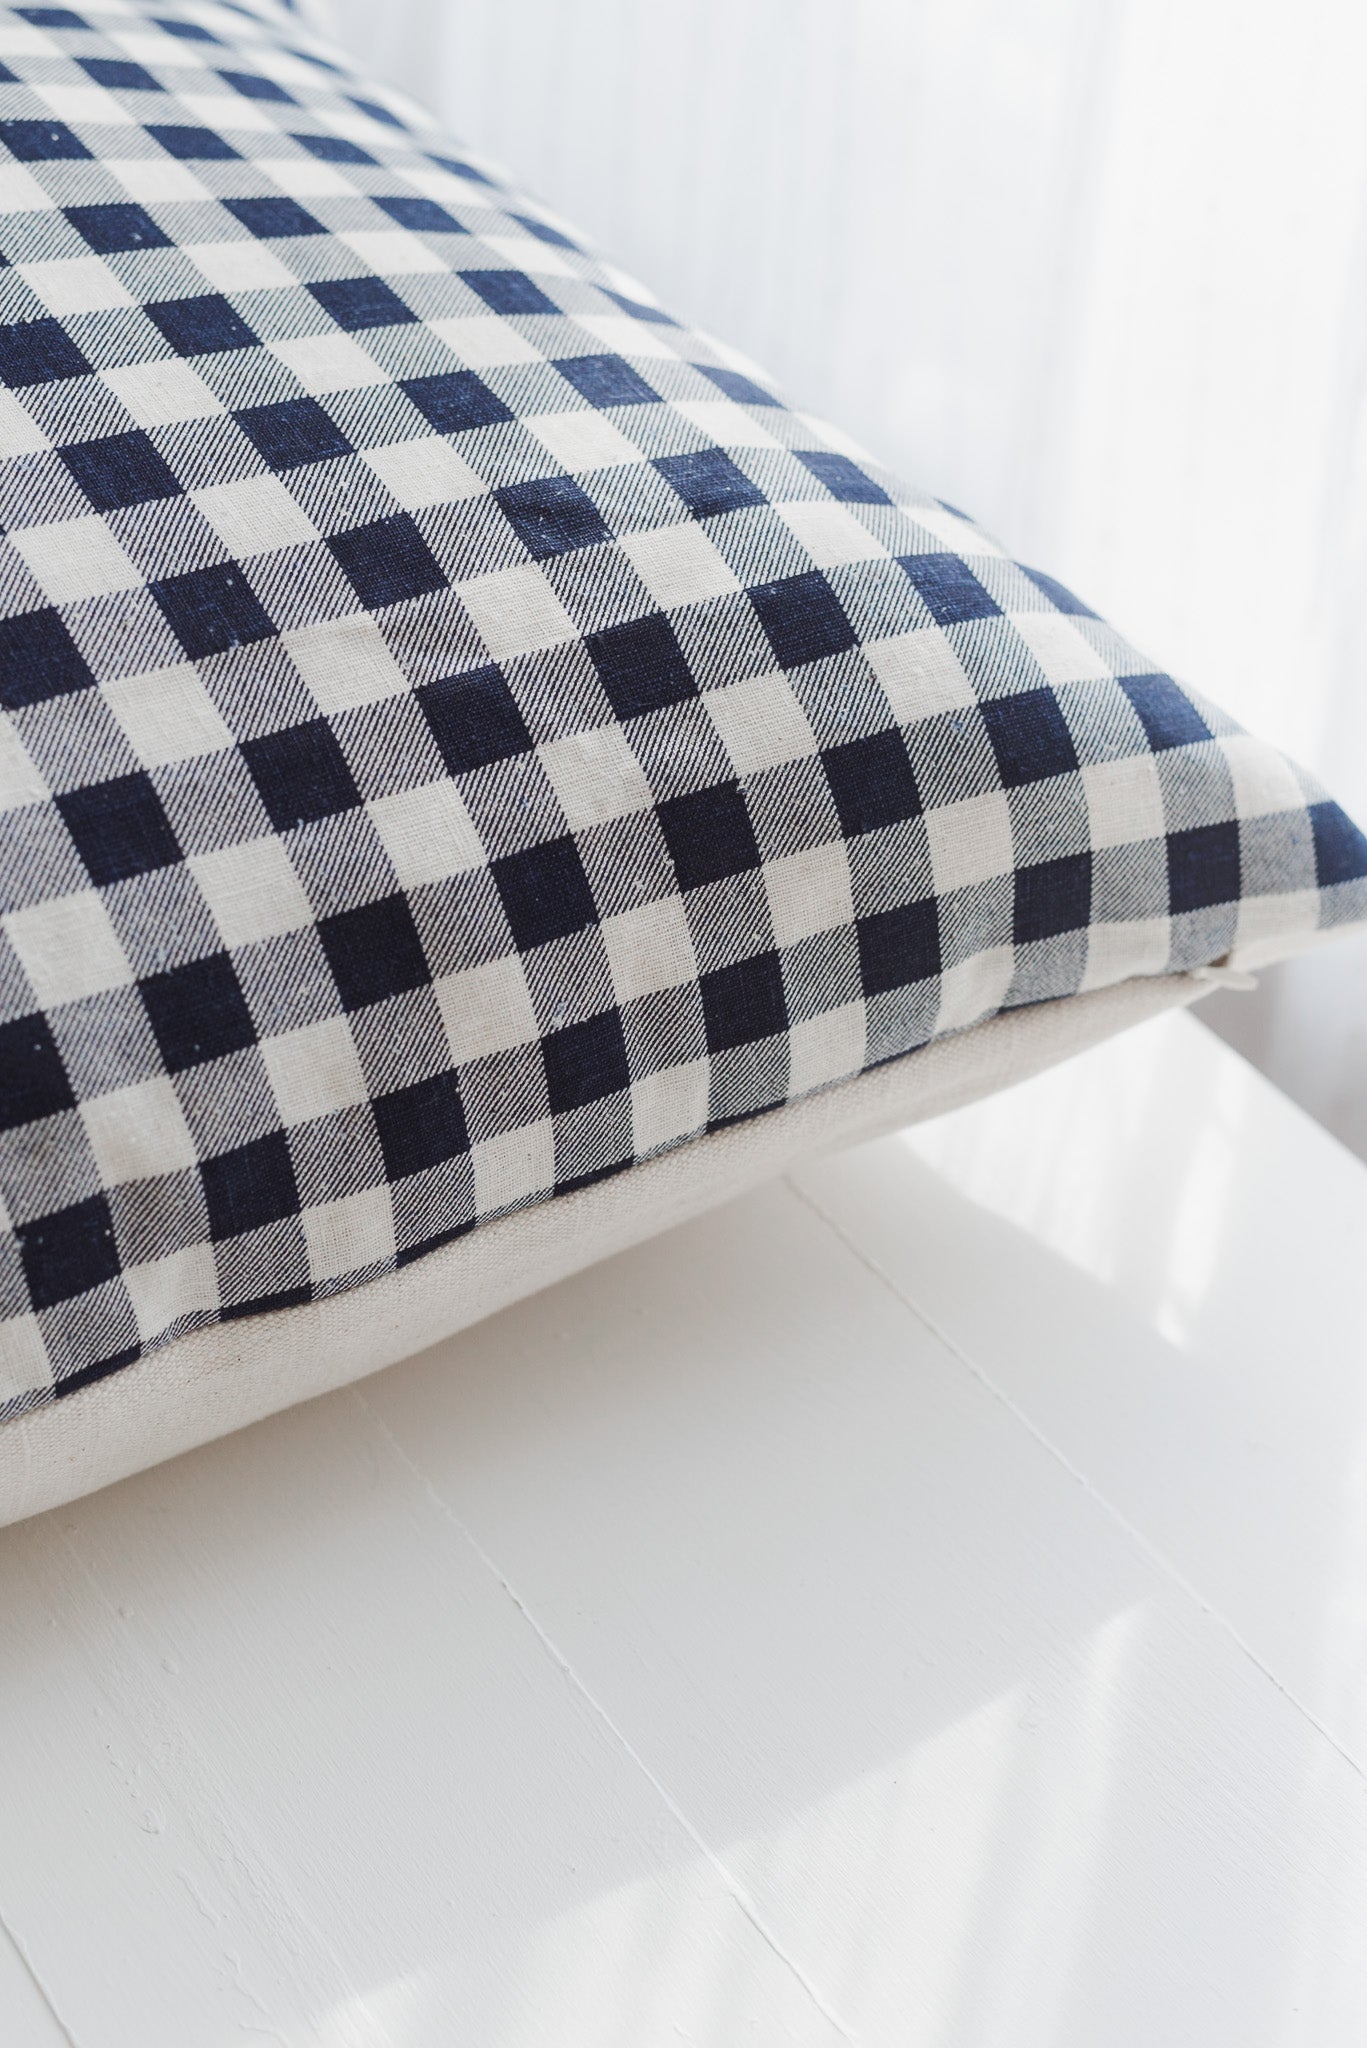 Navy Gingham Pillow. Country Pillow. Shabby chic pillow. Country Living Magazine pillows. 